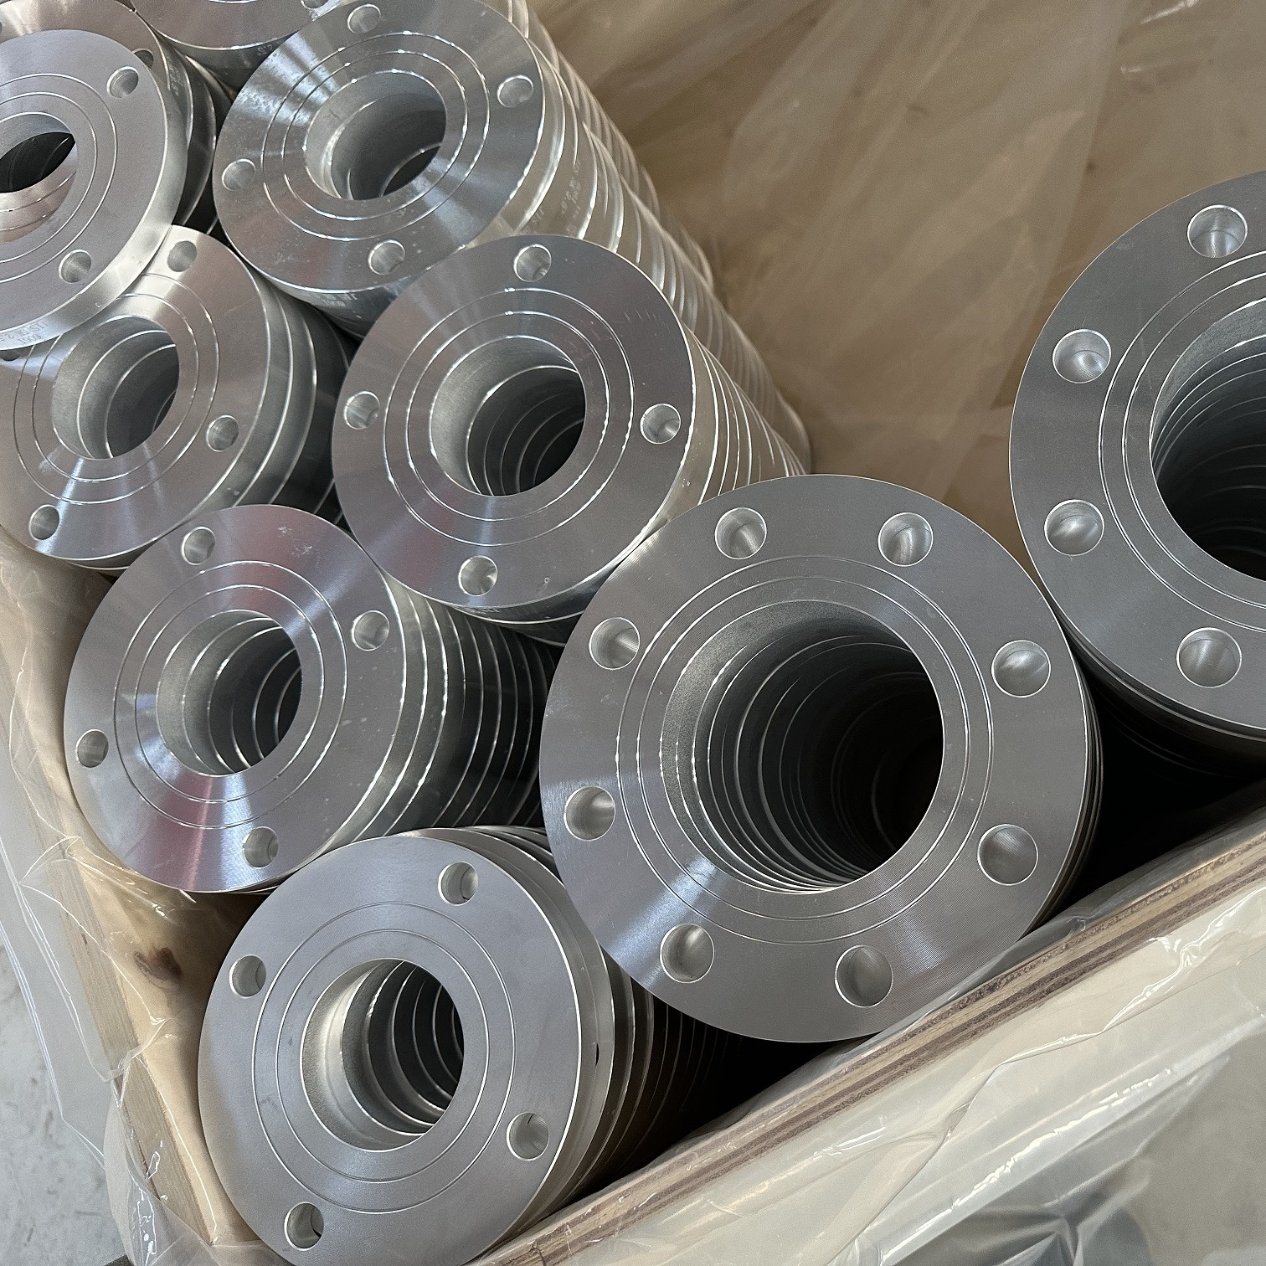 I-Aluminium-6061-6060-6063-Loose-Plate-Lap-Joint-Flange-for-PE-Pipe